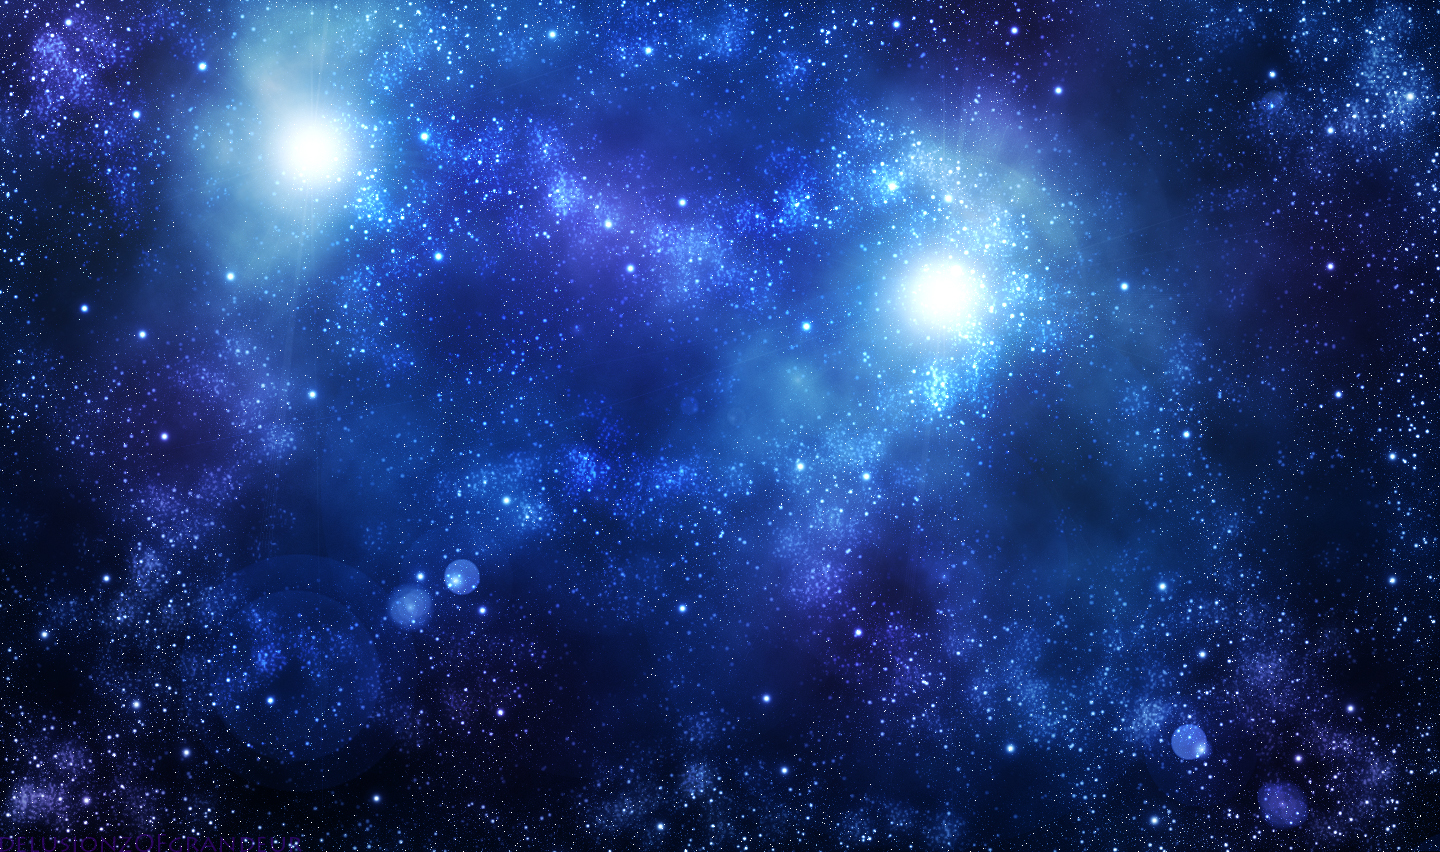 Galaxy HD Wallpapers Space Galaxy HD Wallpapers Check out the cool